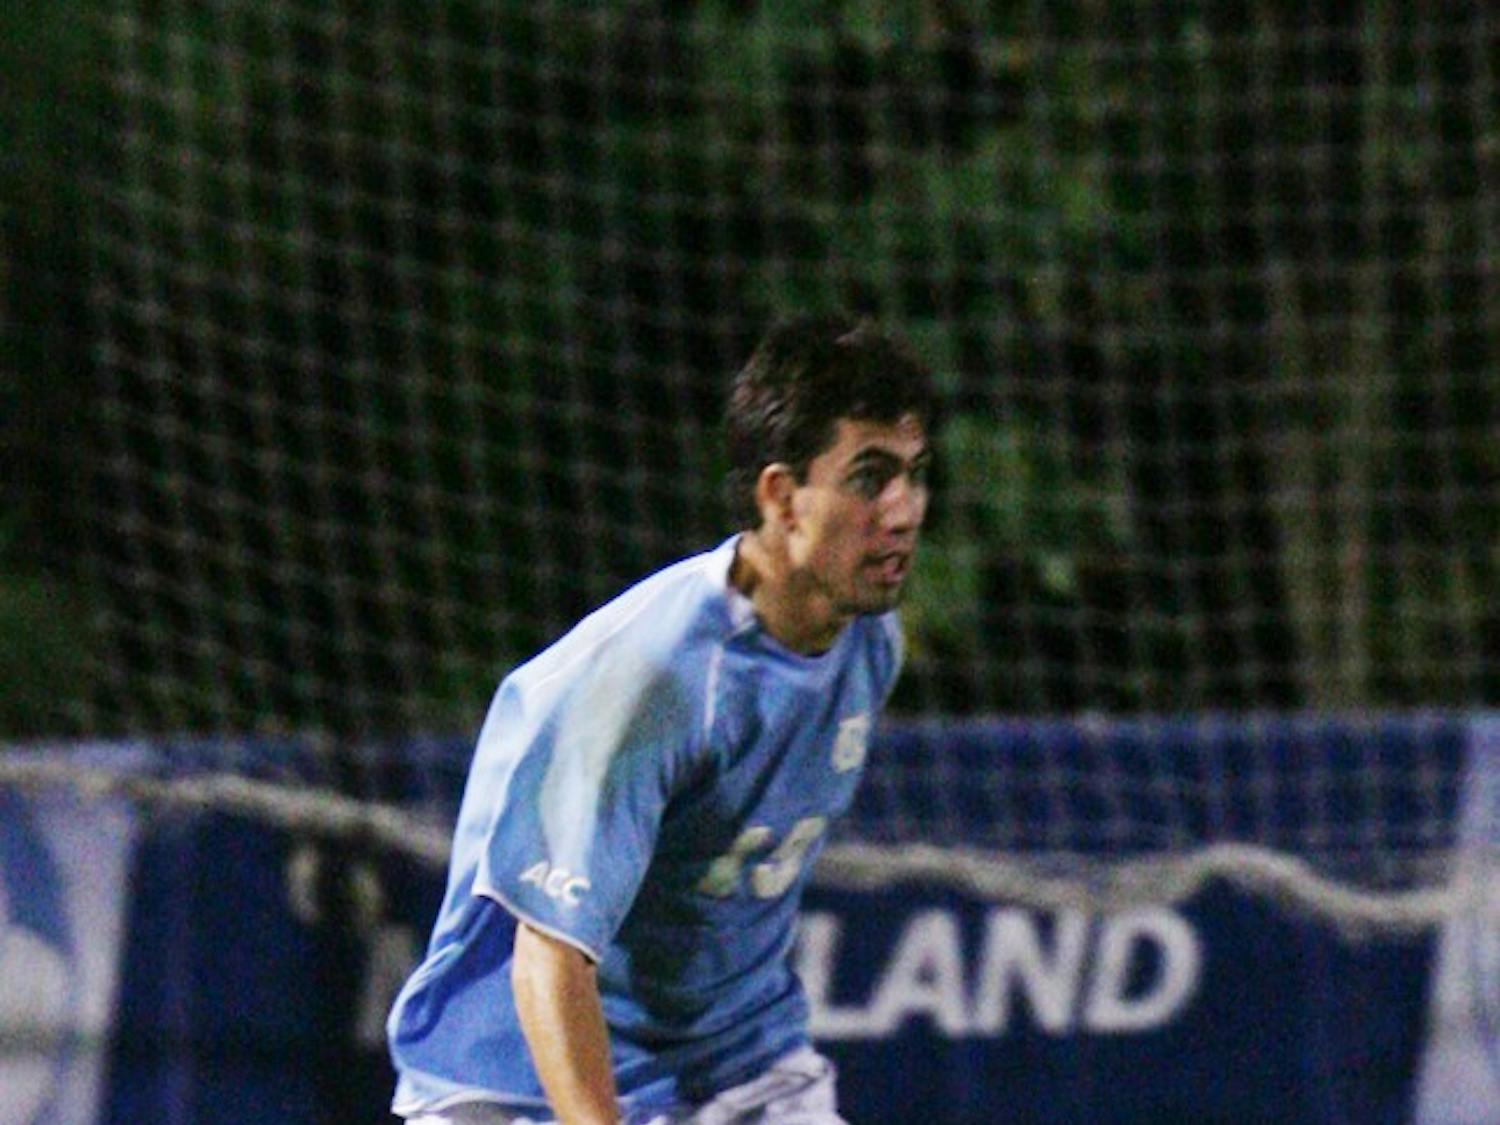 Senior midfielder Michael Farfan had a goal and an assist in UNC’s win against N.C. State in the ACC Tournament quarterfinals Wednesday.